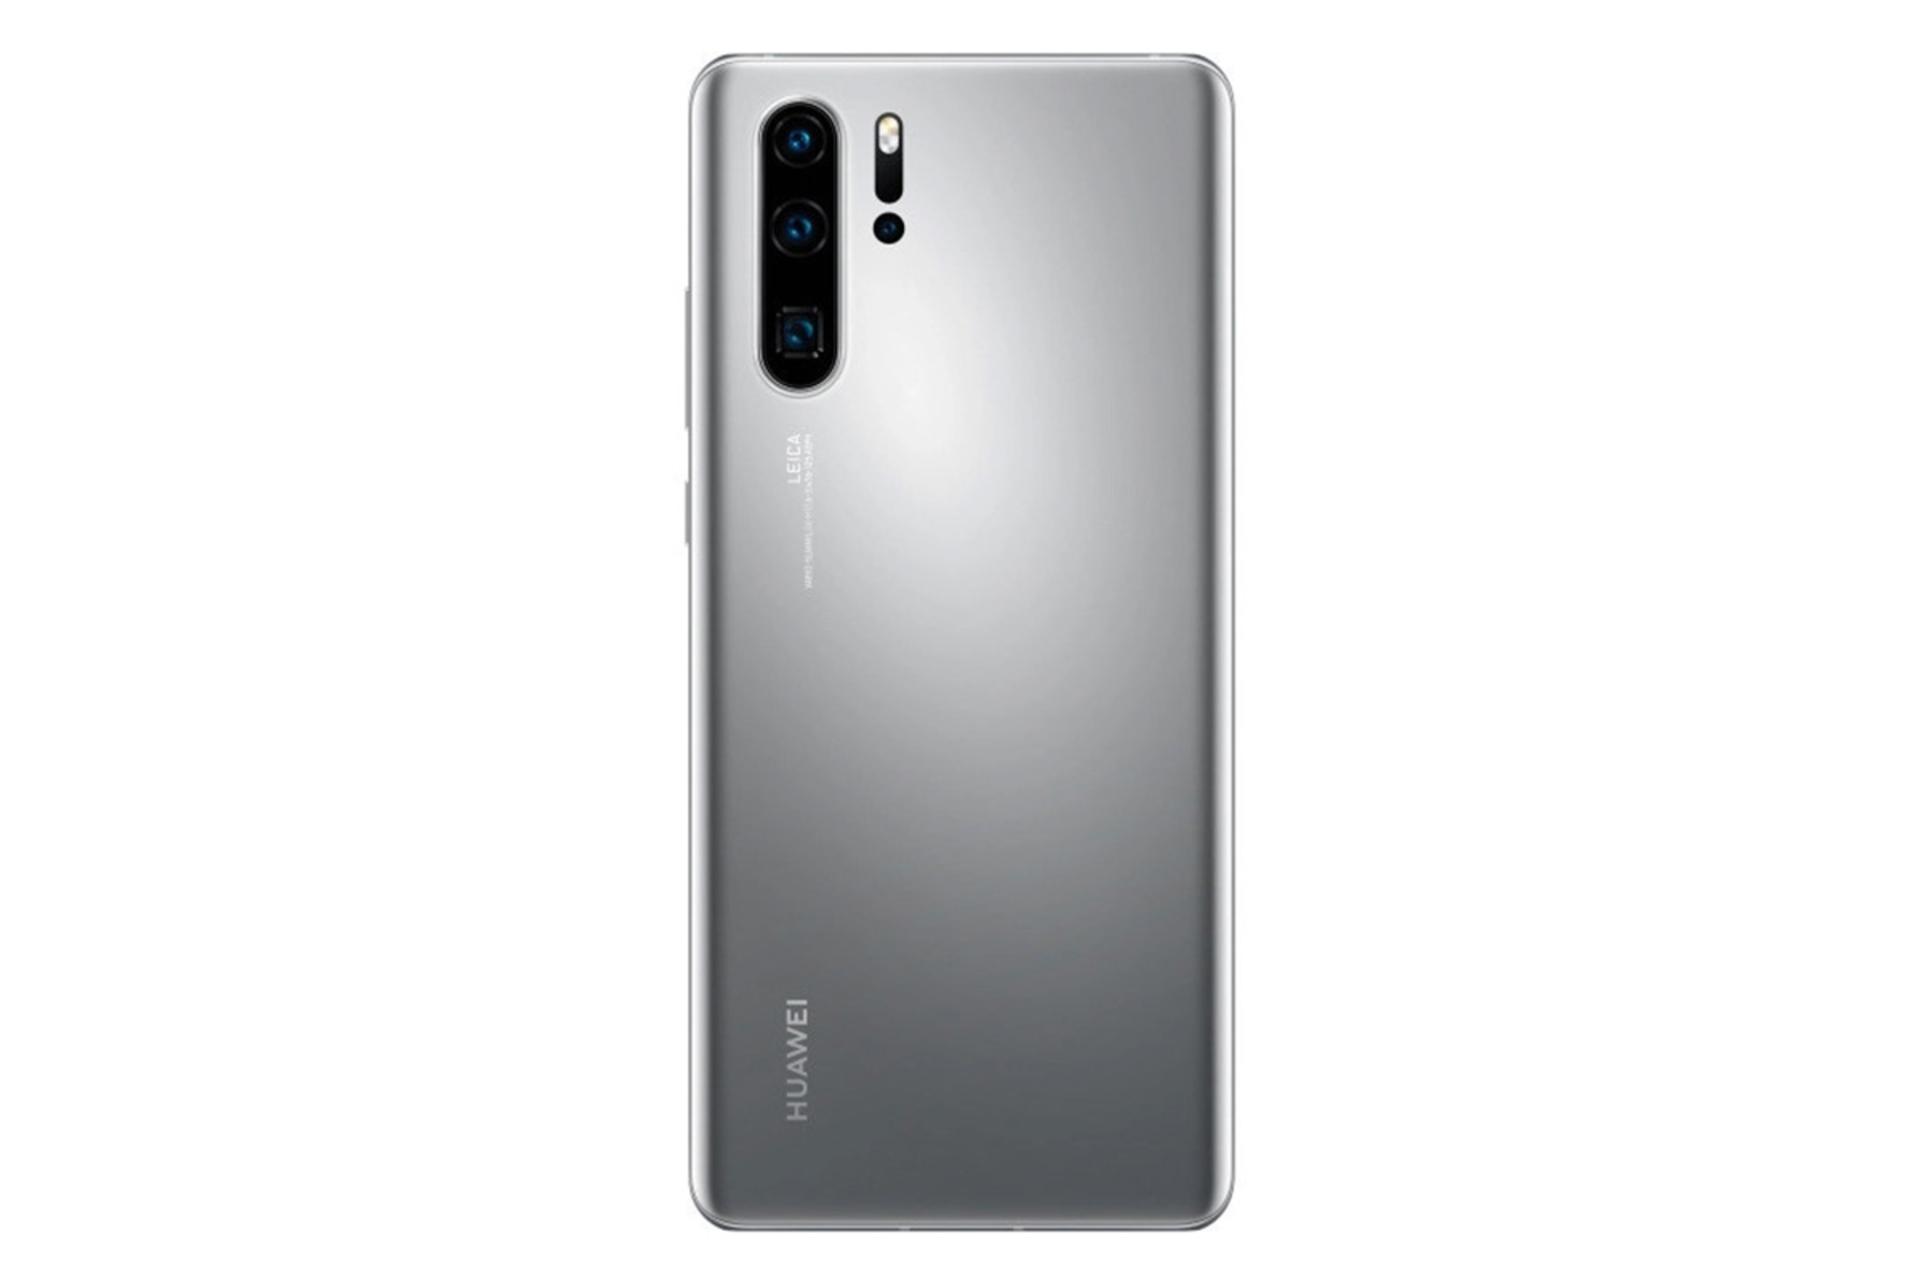 Huawei P30 ProNew Edition / هواوی پی 30 پرو نیو ادیشن